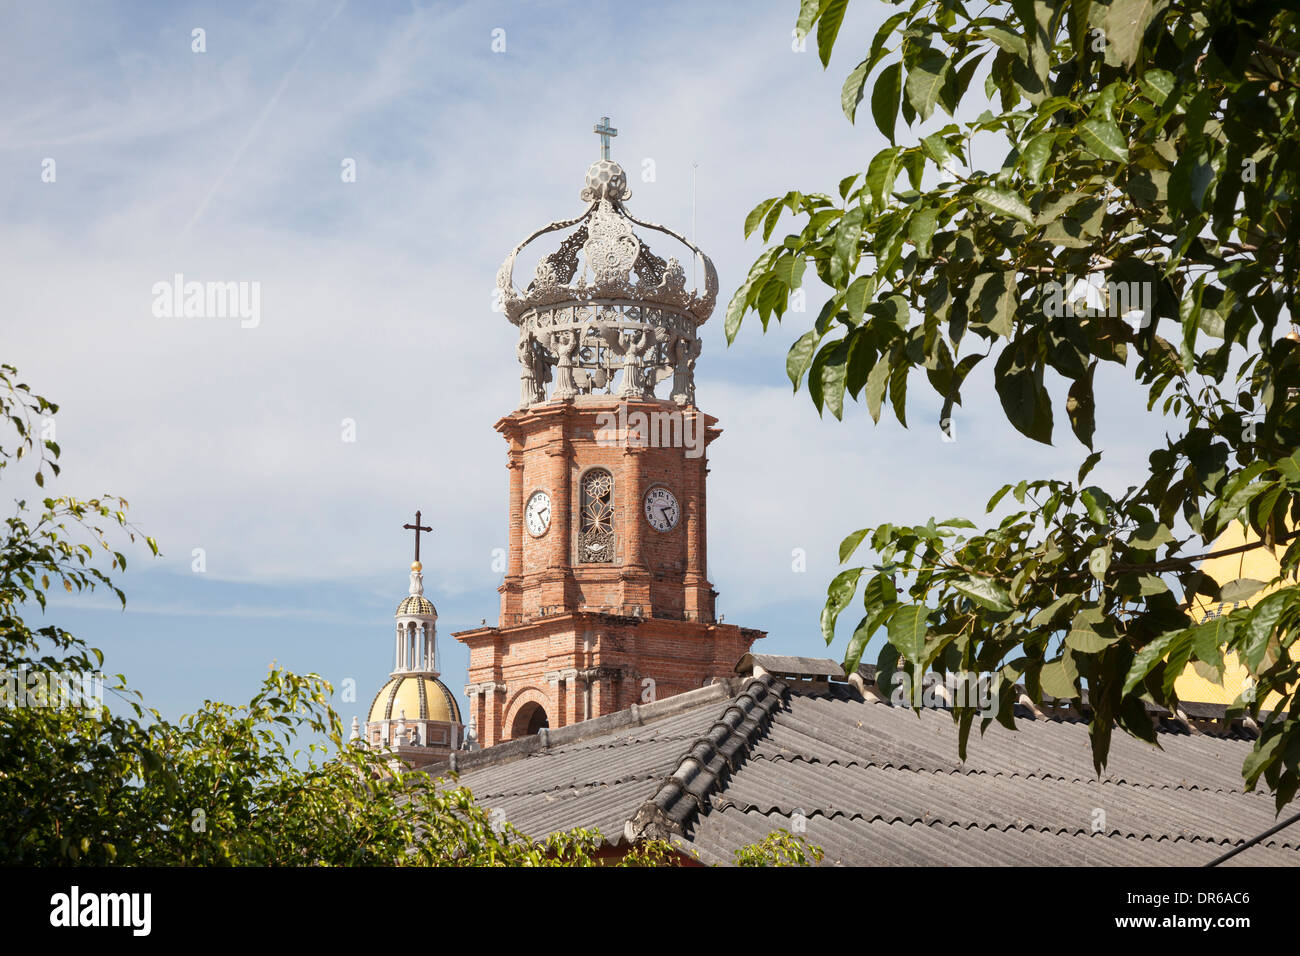 Bell tower of Our Lady of Guadalupe Parish Church - Puerto Vallarta, Jalisco, Mexico Stock Photo